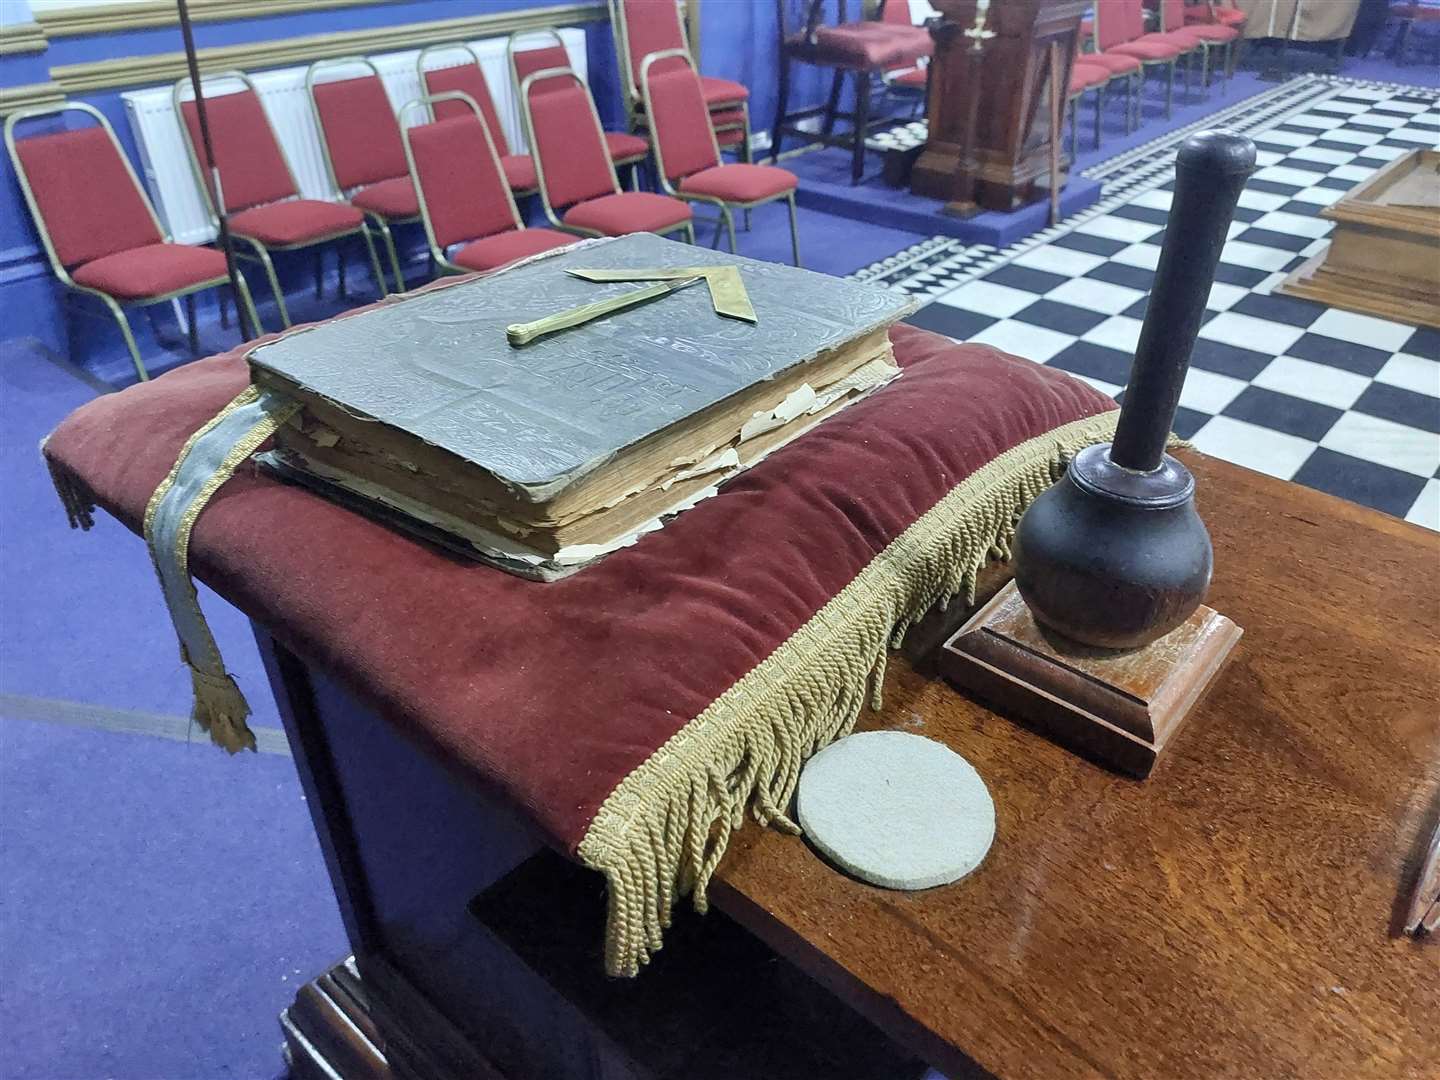 A 258-year-old bible lies on a table in front of the throne